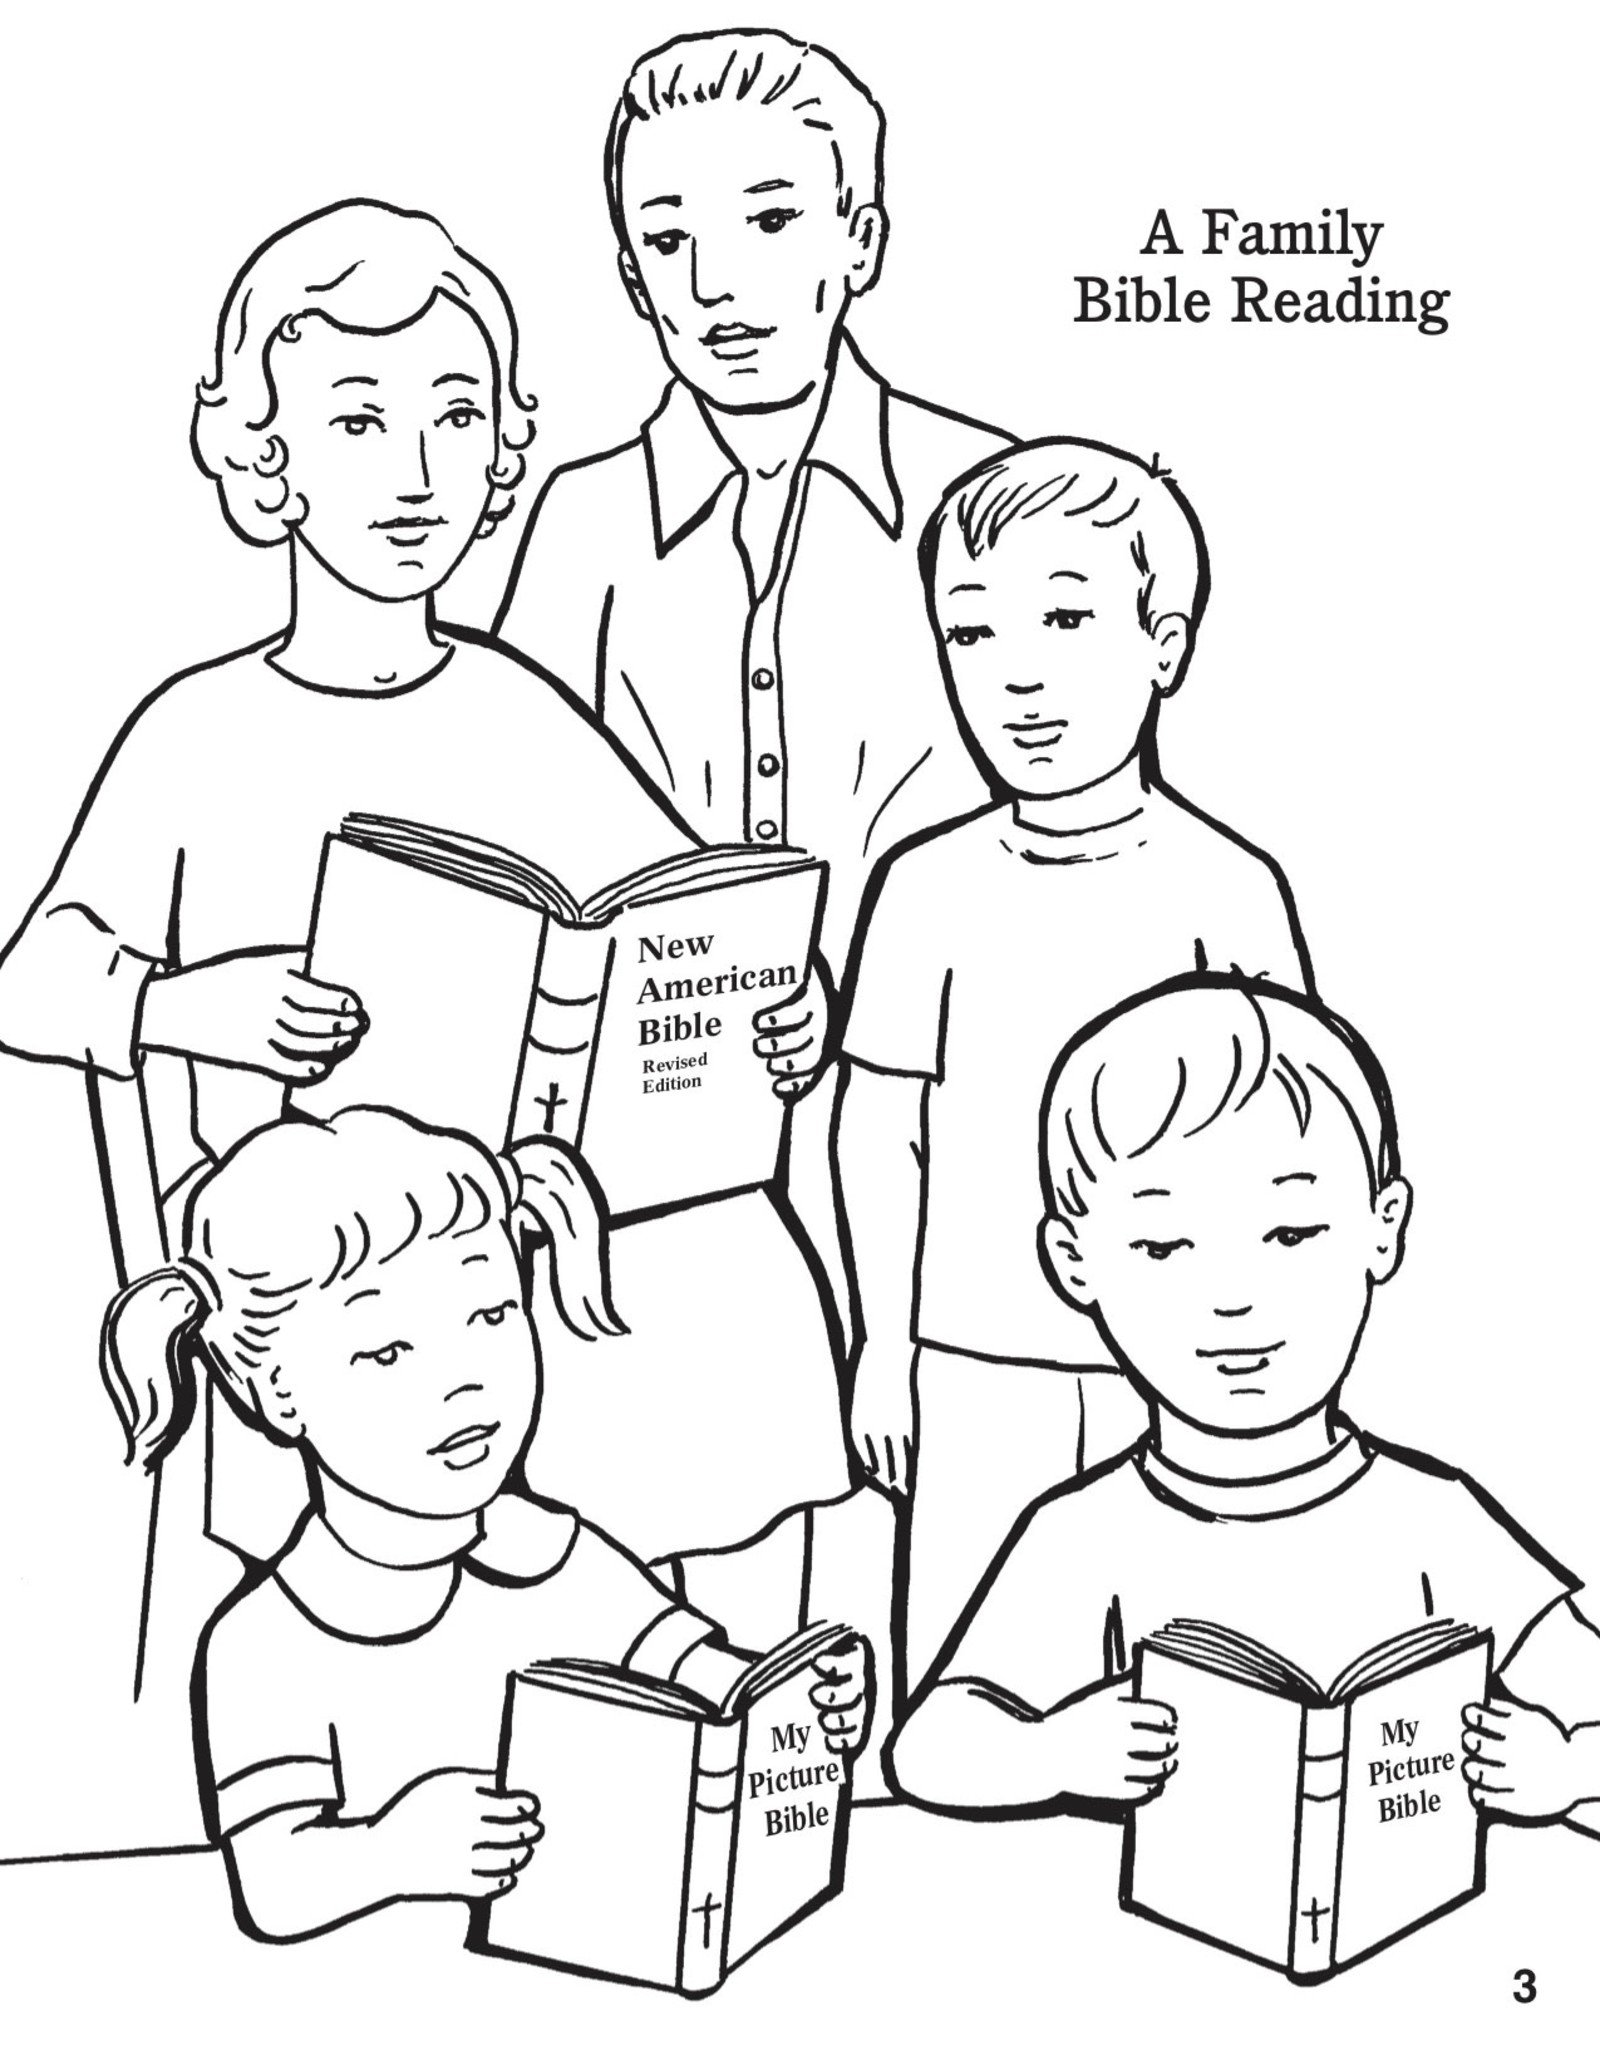 Catholic Book Publishing Coloring Book about the Holy Bible, by Emma McKean